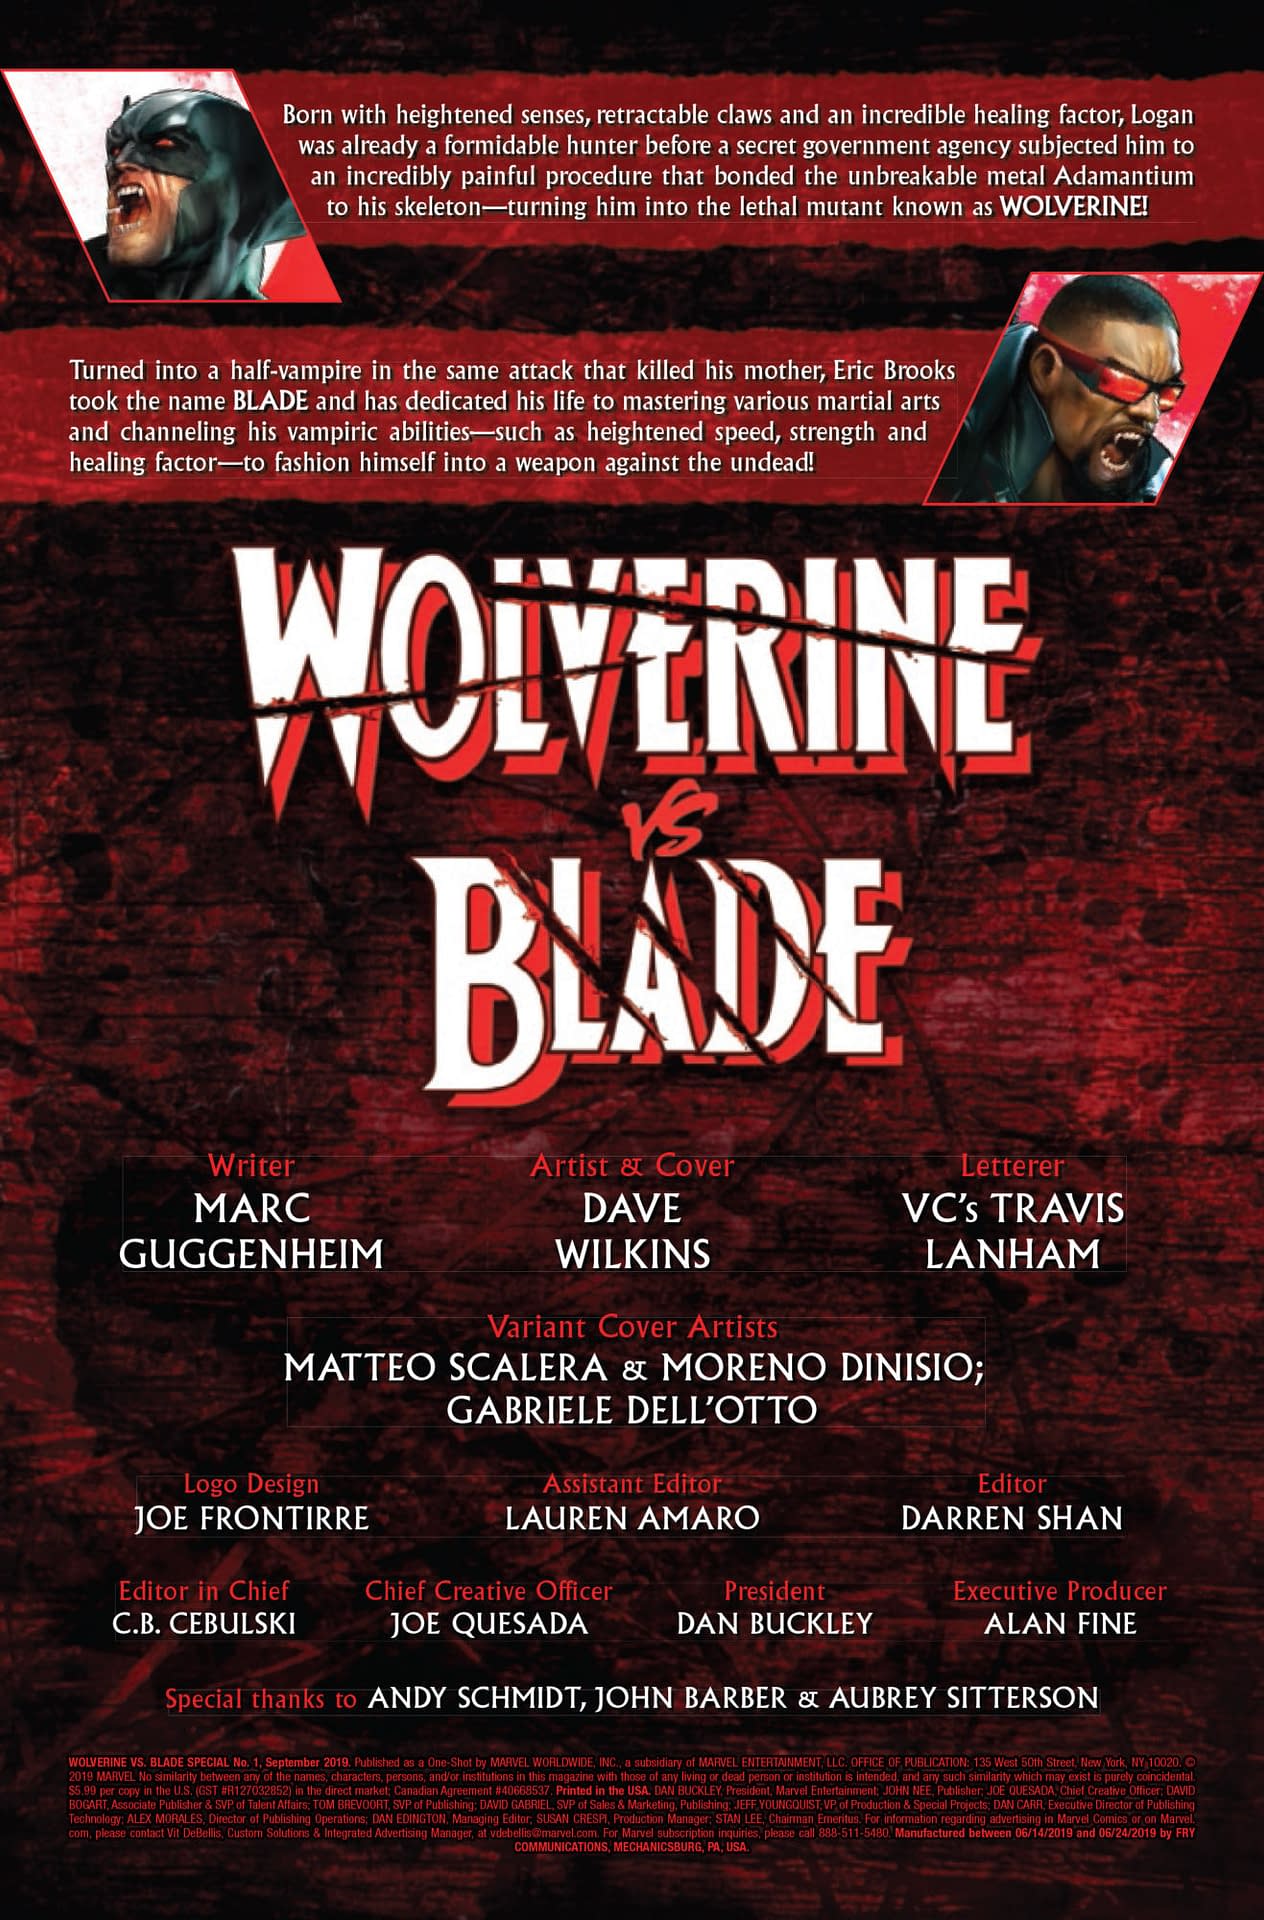 Wolverine vs. Blade #1: With Eyes Wide Open [Preview]